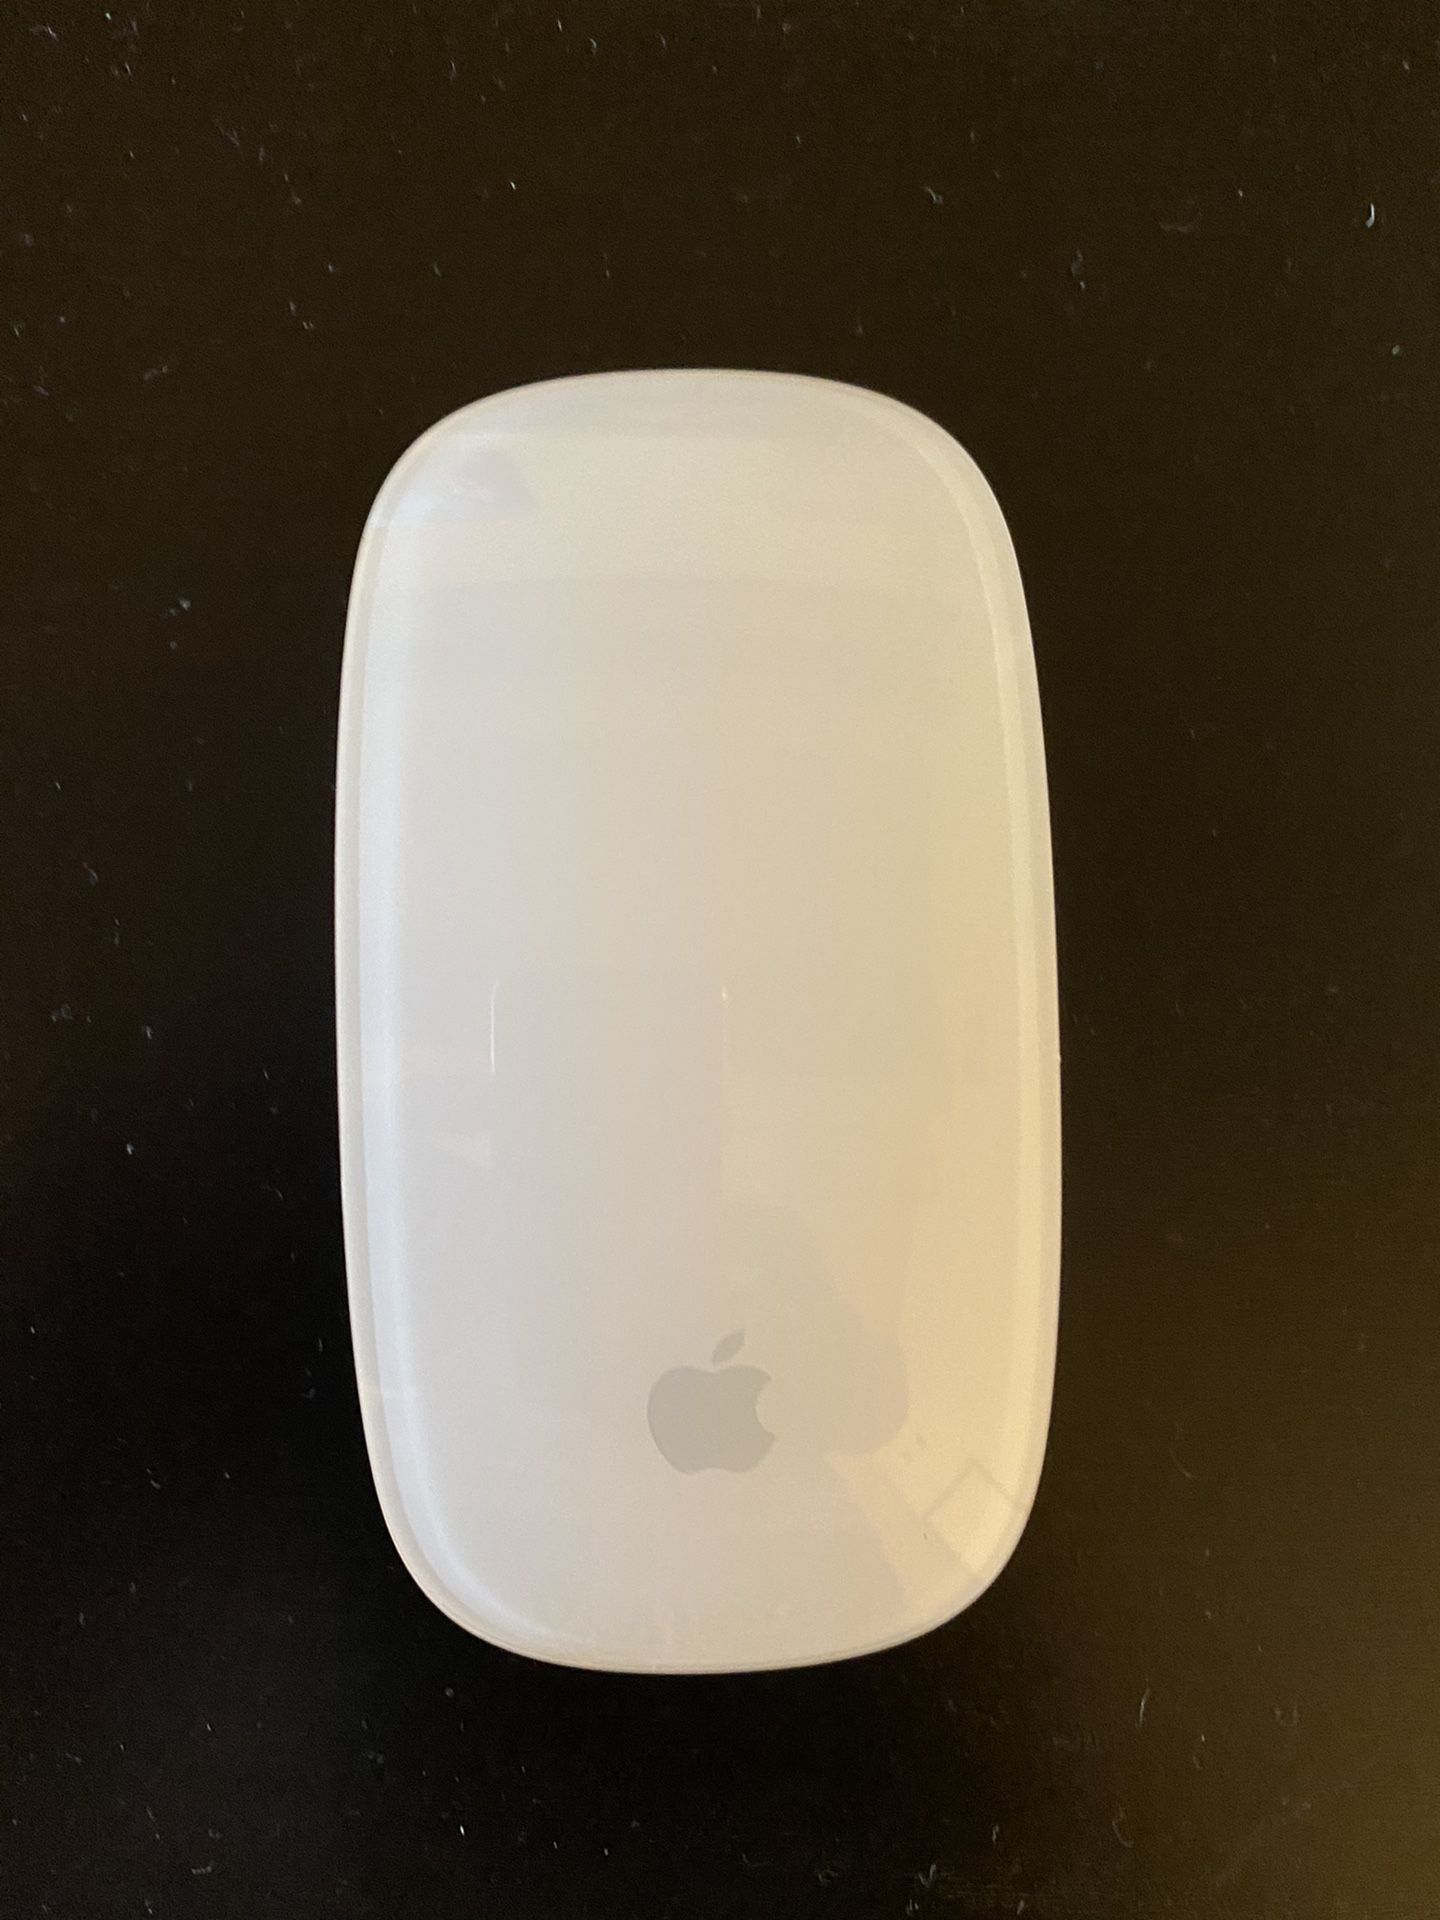 Apple Magic Mouse-Wireless-Silver